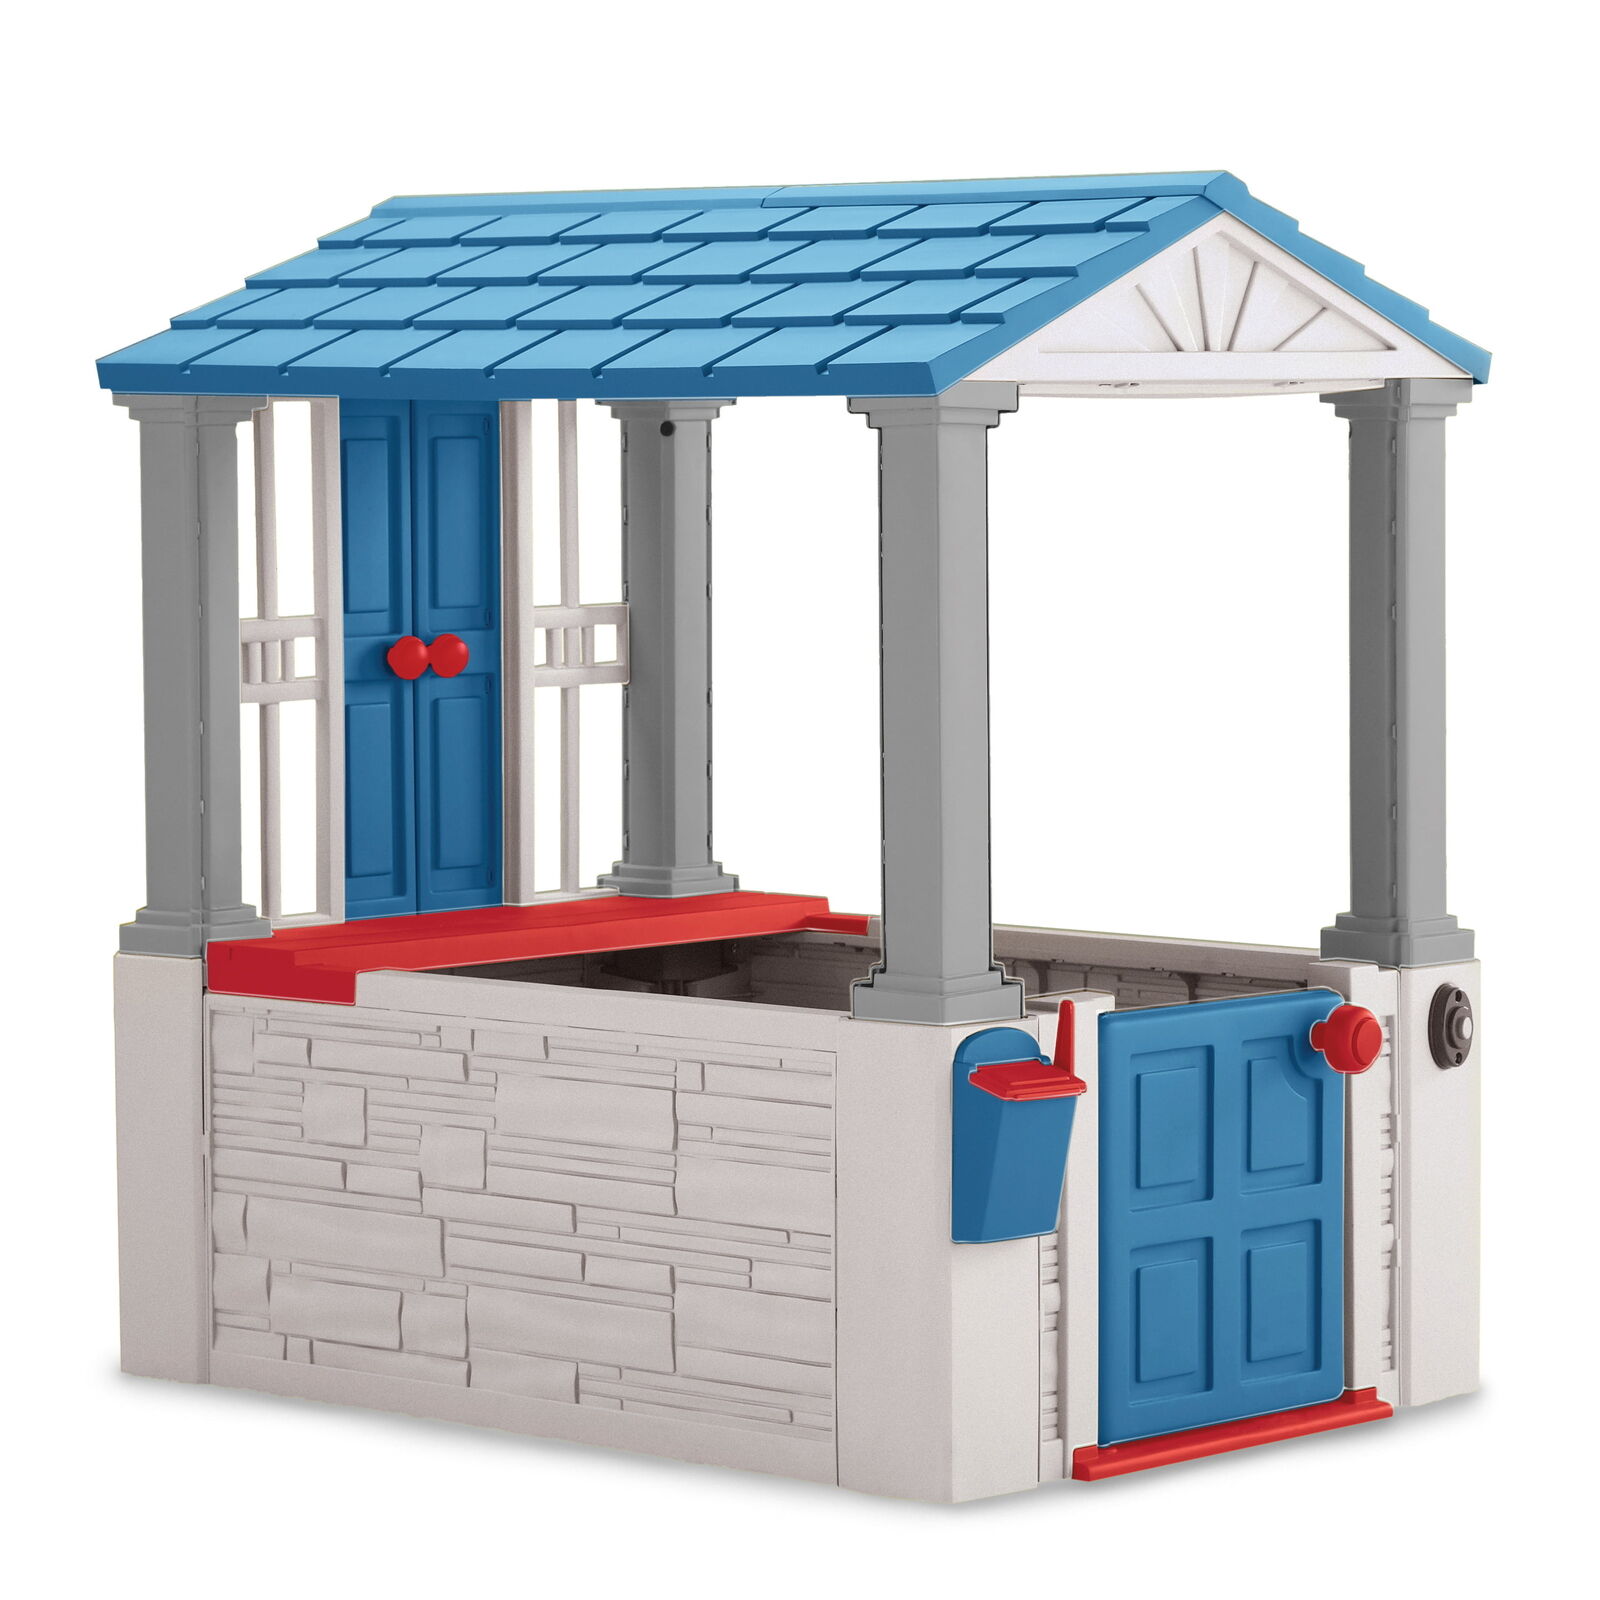 American Plastic Toys Playhouse Unisex Indoor & Outdoor Play